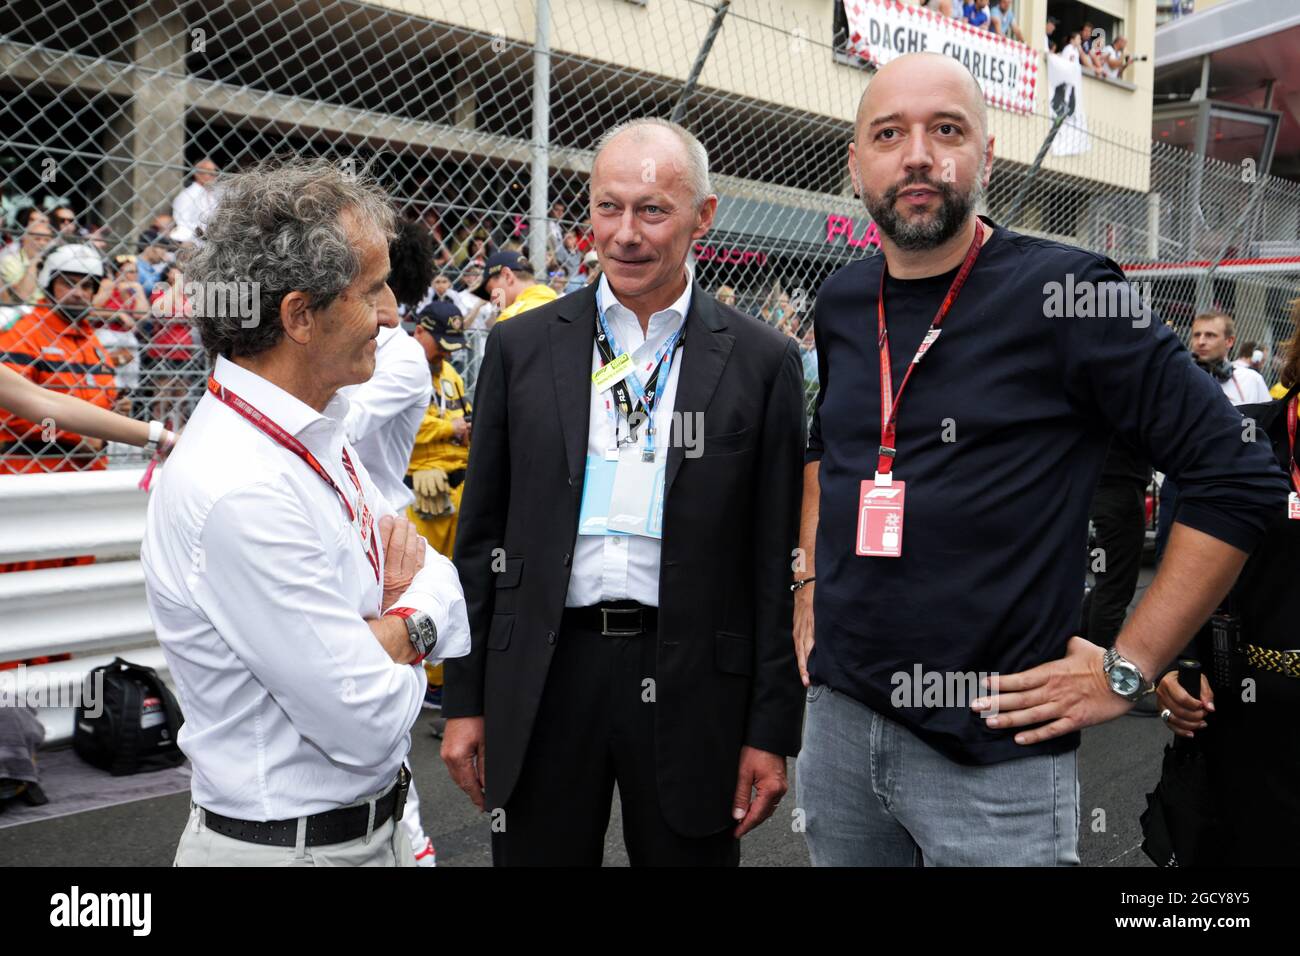 (L to R): Alain Prost (FRA) Renault Sport F1 Team Special Advisor with Thierry Bollore (FRA) Renault Chief Competitive Officer and Cyril Abiteboul (FRA) Renault Sport F1 Managing Director on the grid. Monaco Grand Prix, Sunday 27th May 2018. Monte Carlo, Monaco. Stock Photo